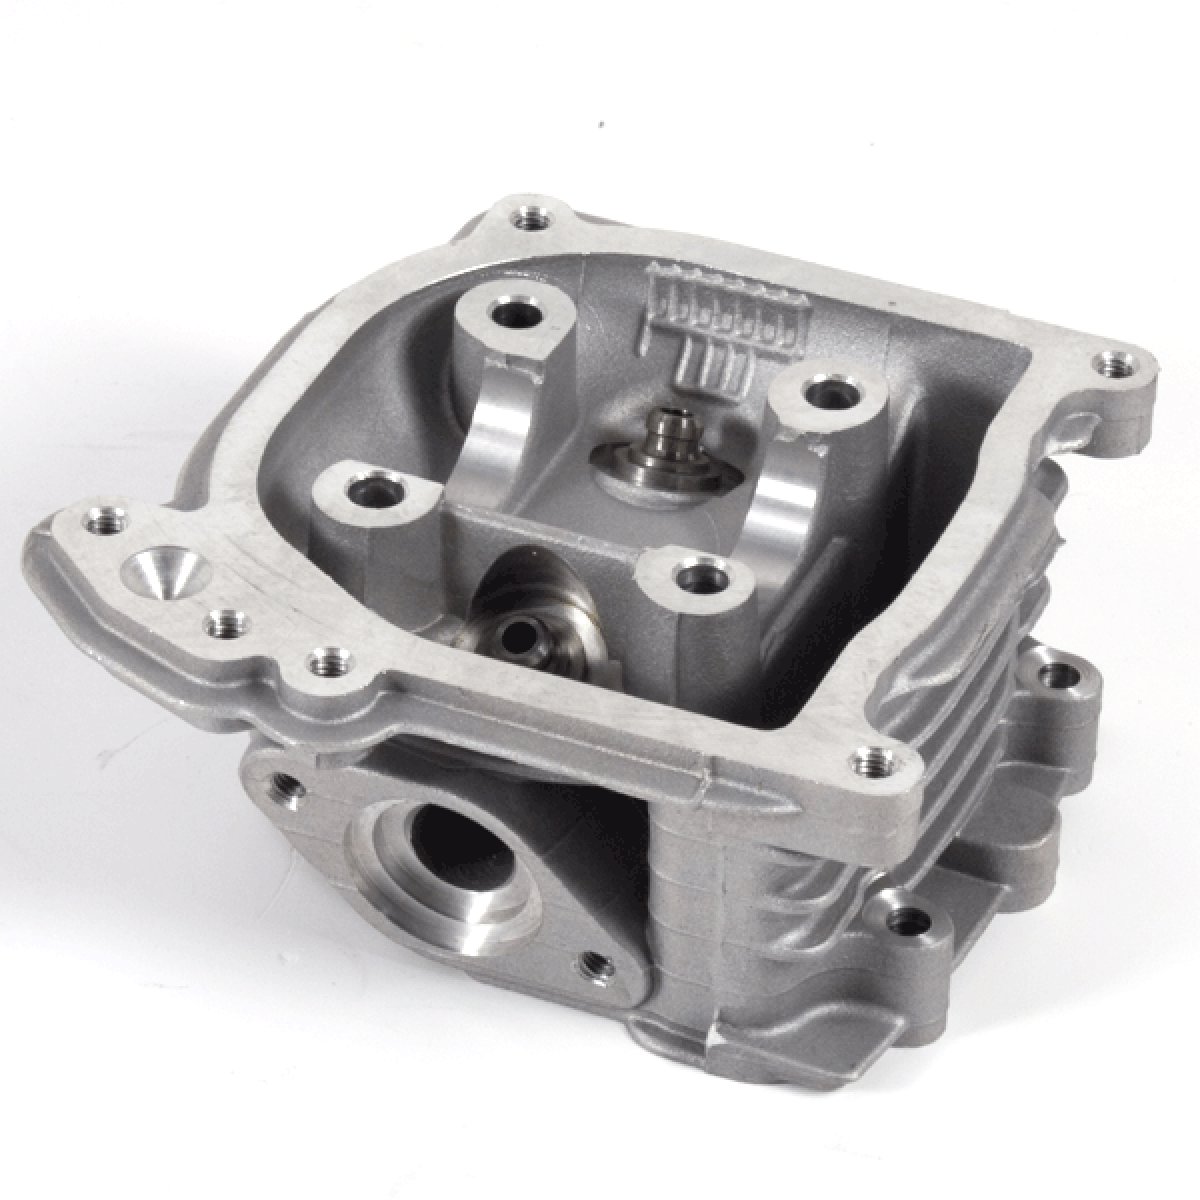 Performance Cylinder Head w/ 64mm Valve Length GY6 50cc 139QMB Scooter 50mm EGR